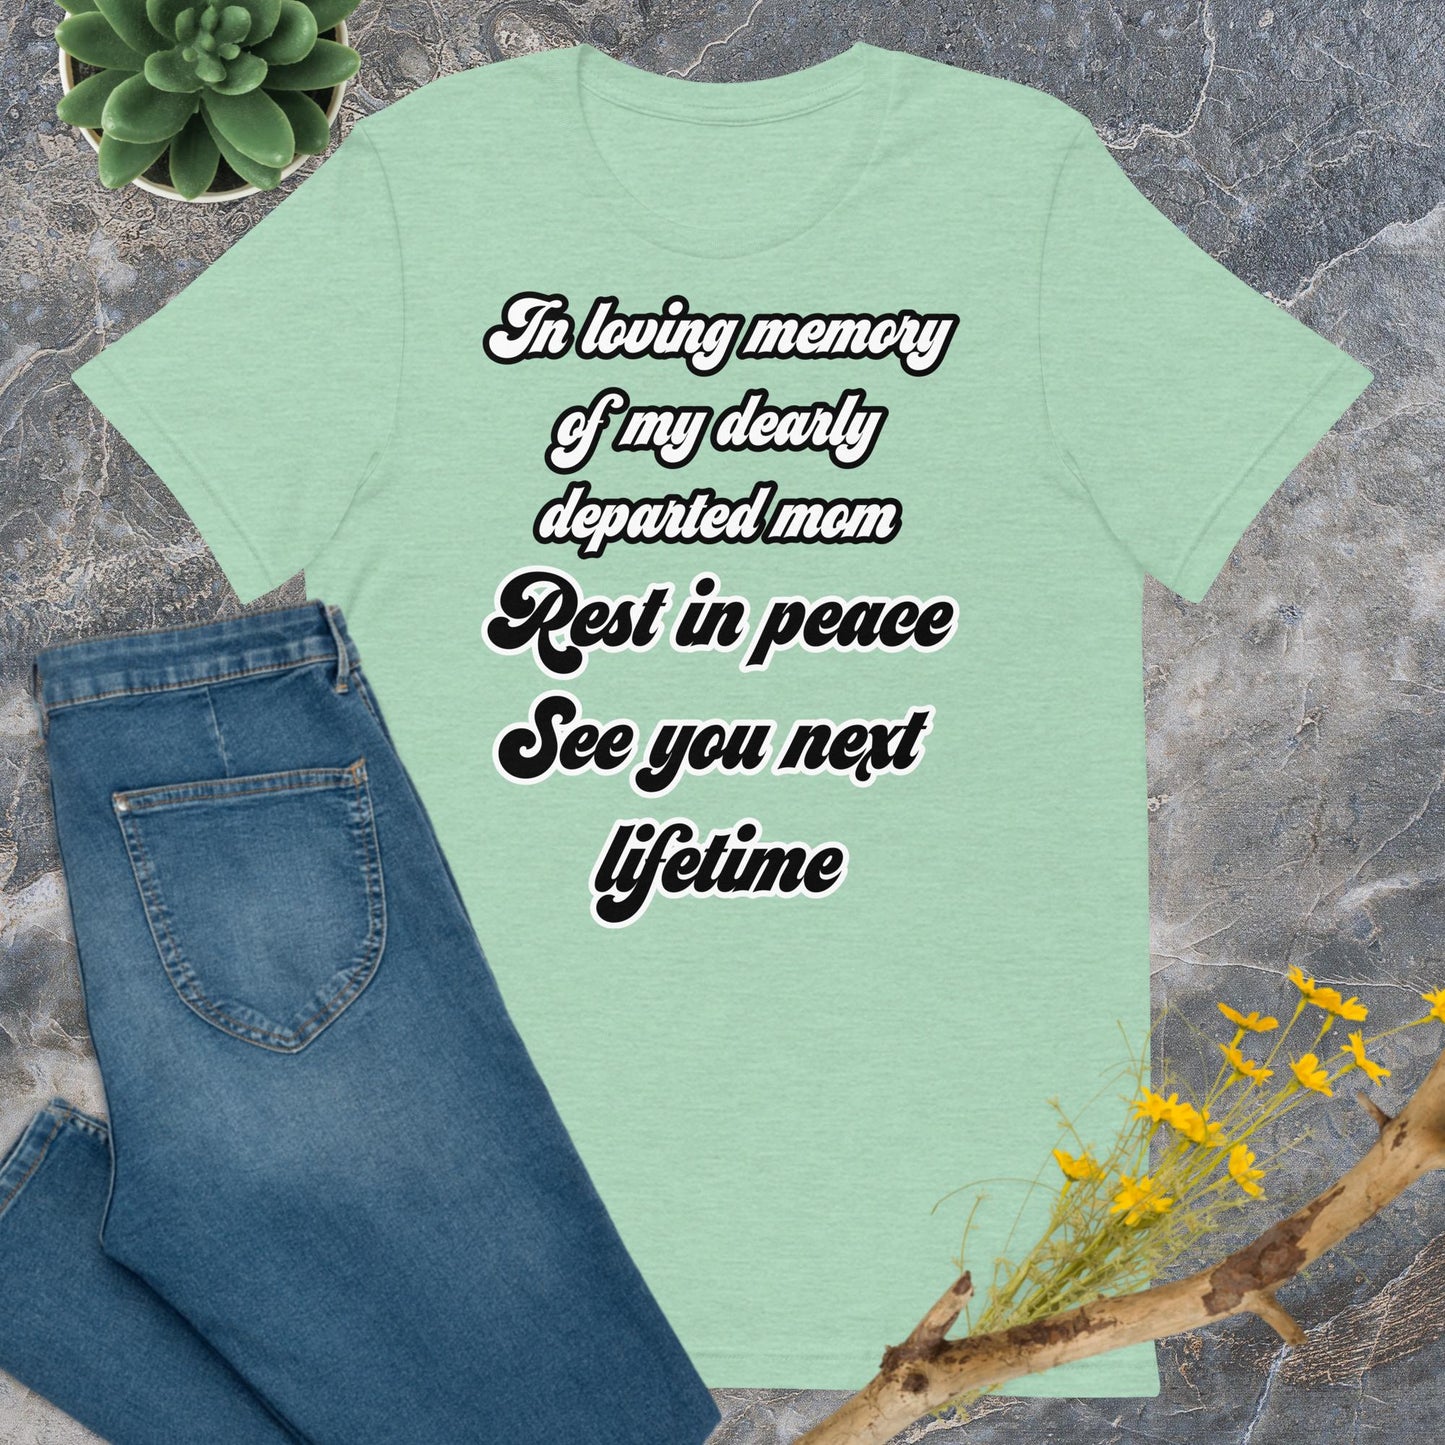 Bella + Canvas 3001 t-shirt. Heather prism mint colored (light green), front view. White and black scripted written quote "In loving memory of my dearly departed mom. Rest in peace. See you next lifetime." Shown laying flat on grey marble with blue jeans, a green succulent plant, and a brown twig with yellow flowers. Jamilliah's Wisdom Is Timeless Shop - wisdomistimeless.com.